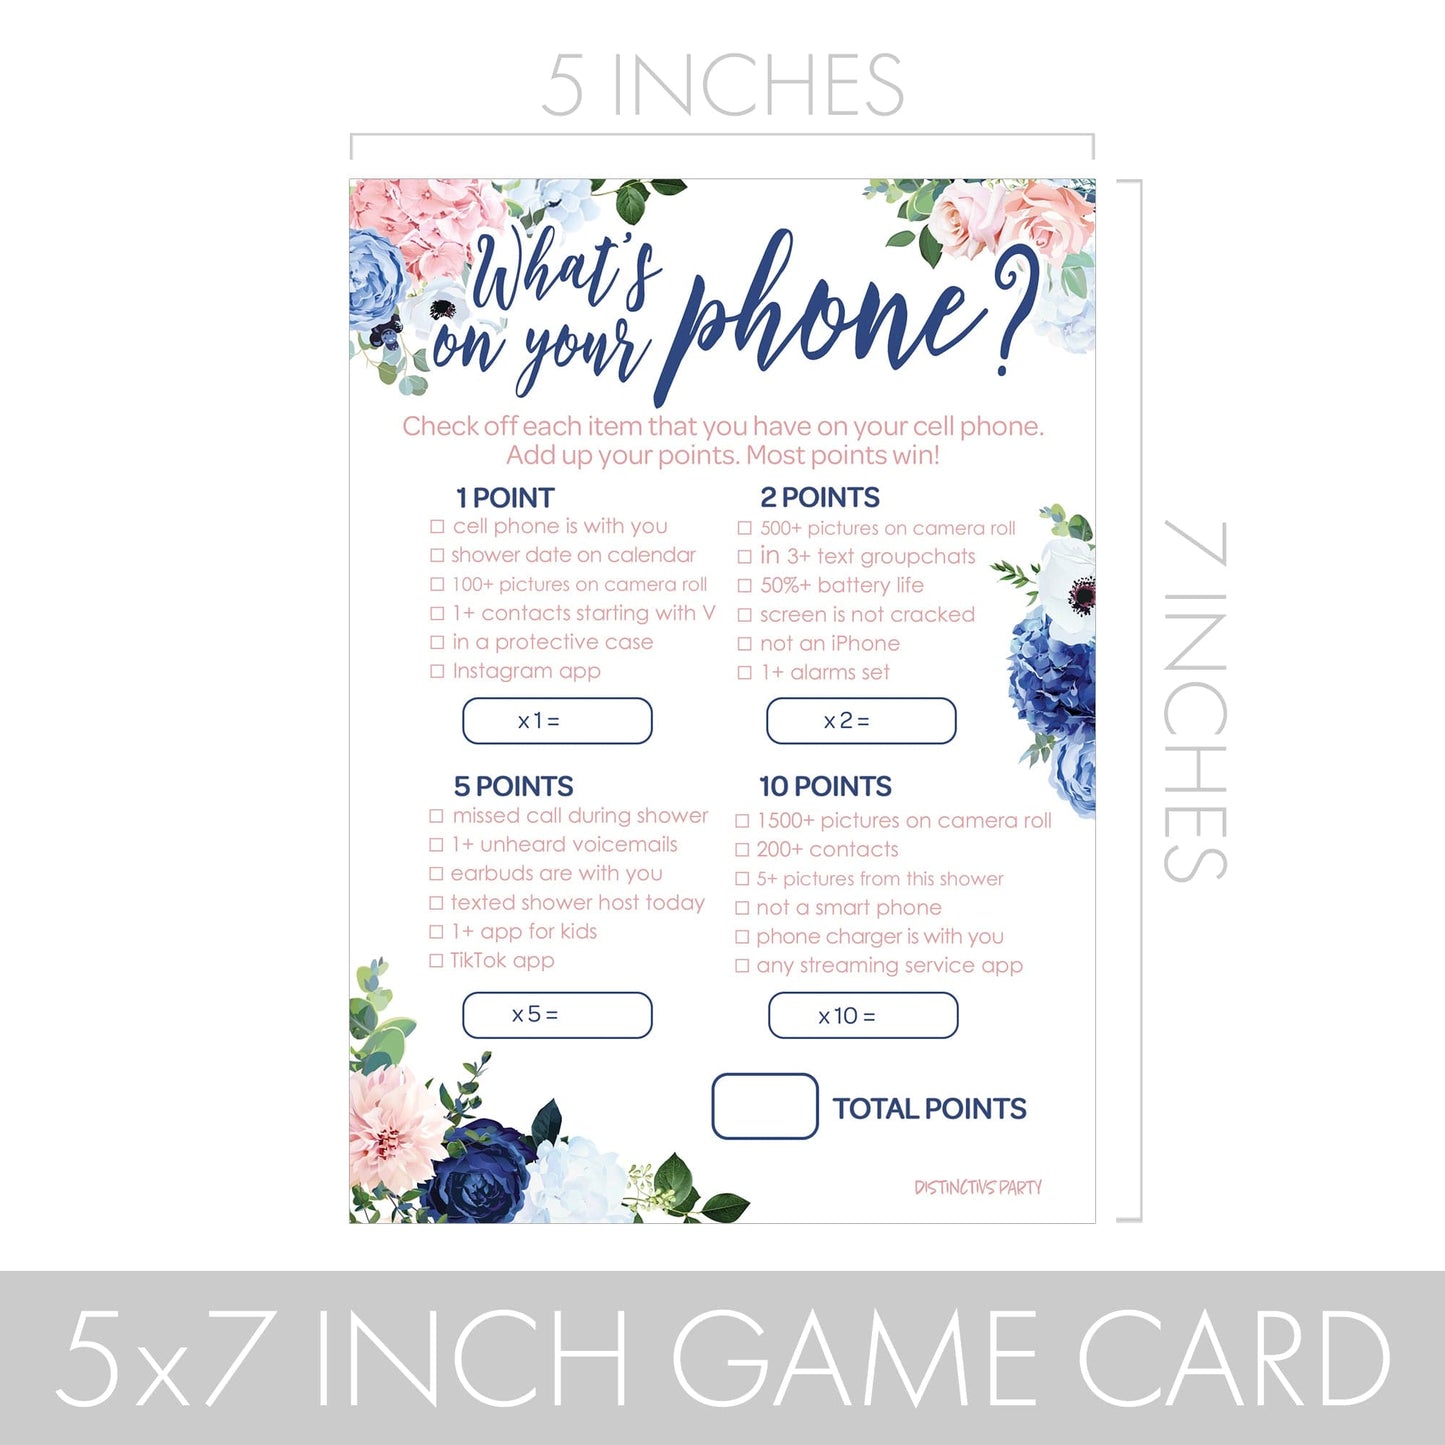 Navy and Blush Gender Reveal Party Game with premium card stock measuring 5" x 7" and an easy-to-write-on surface